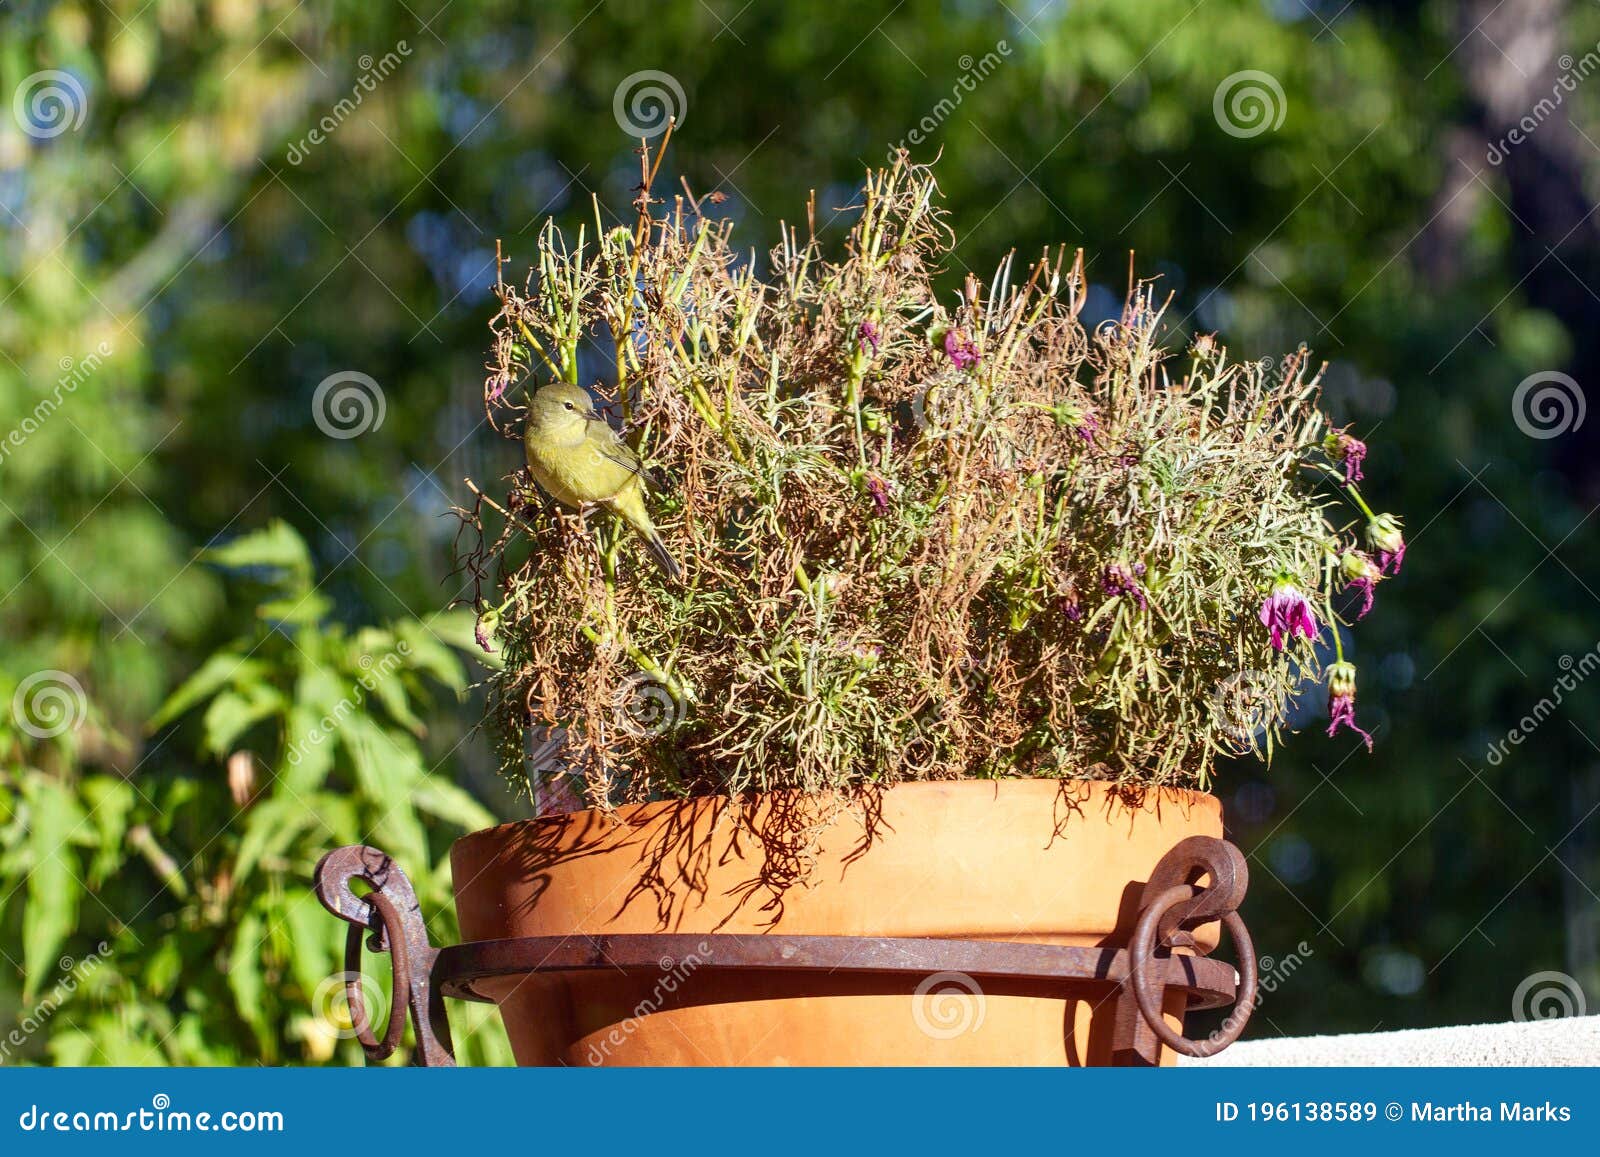 Juvenile Yellow Warbler in a Potted Plant Stock Image - Image of ...